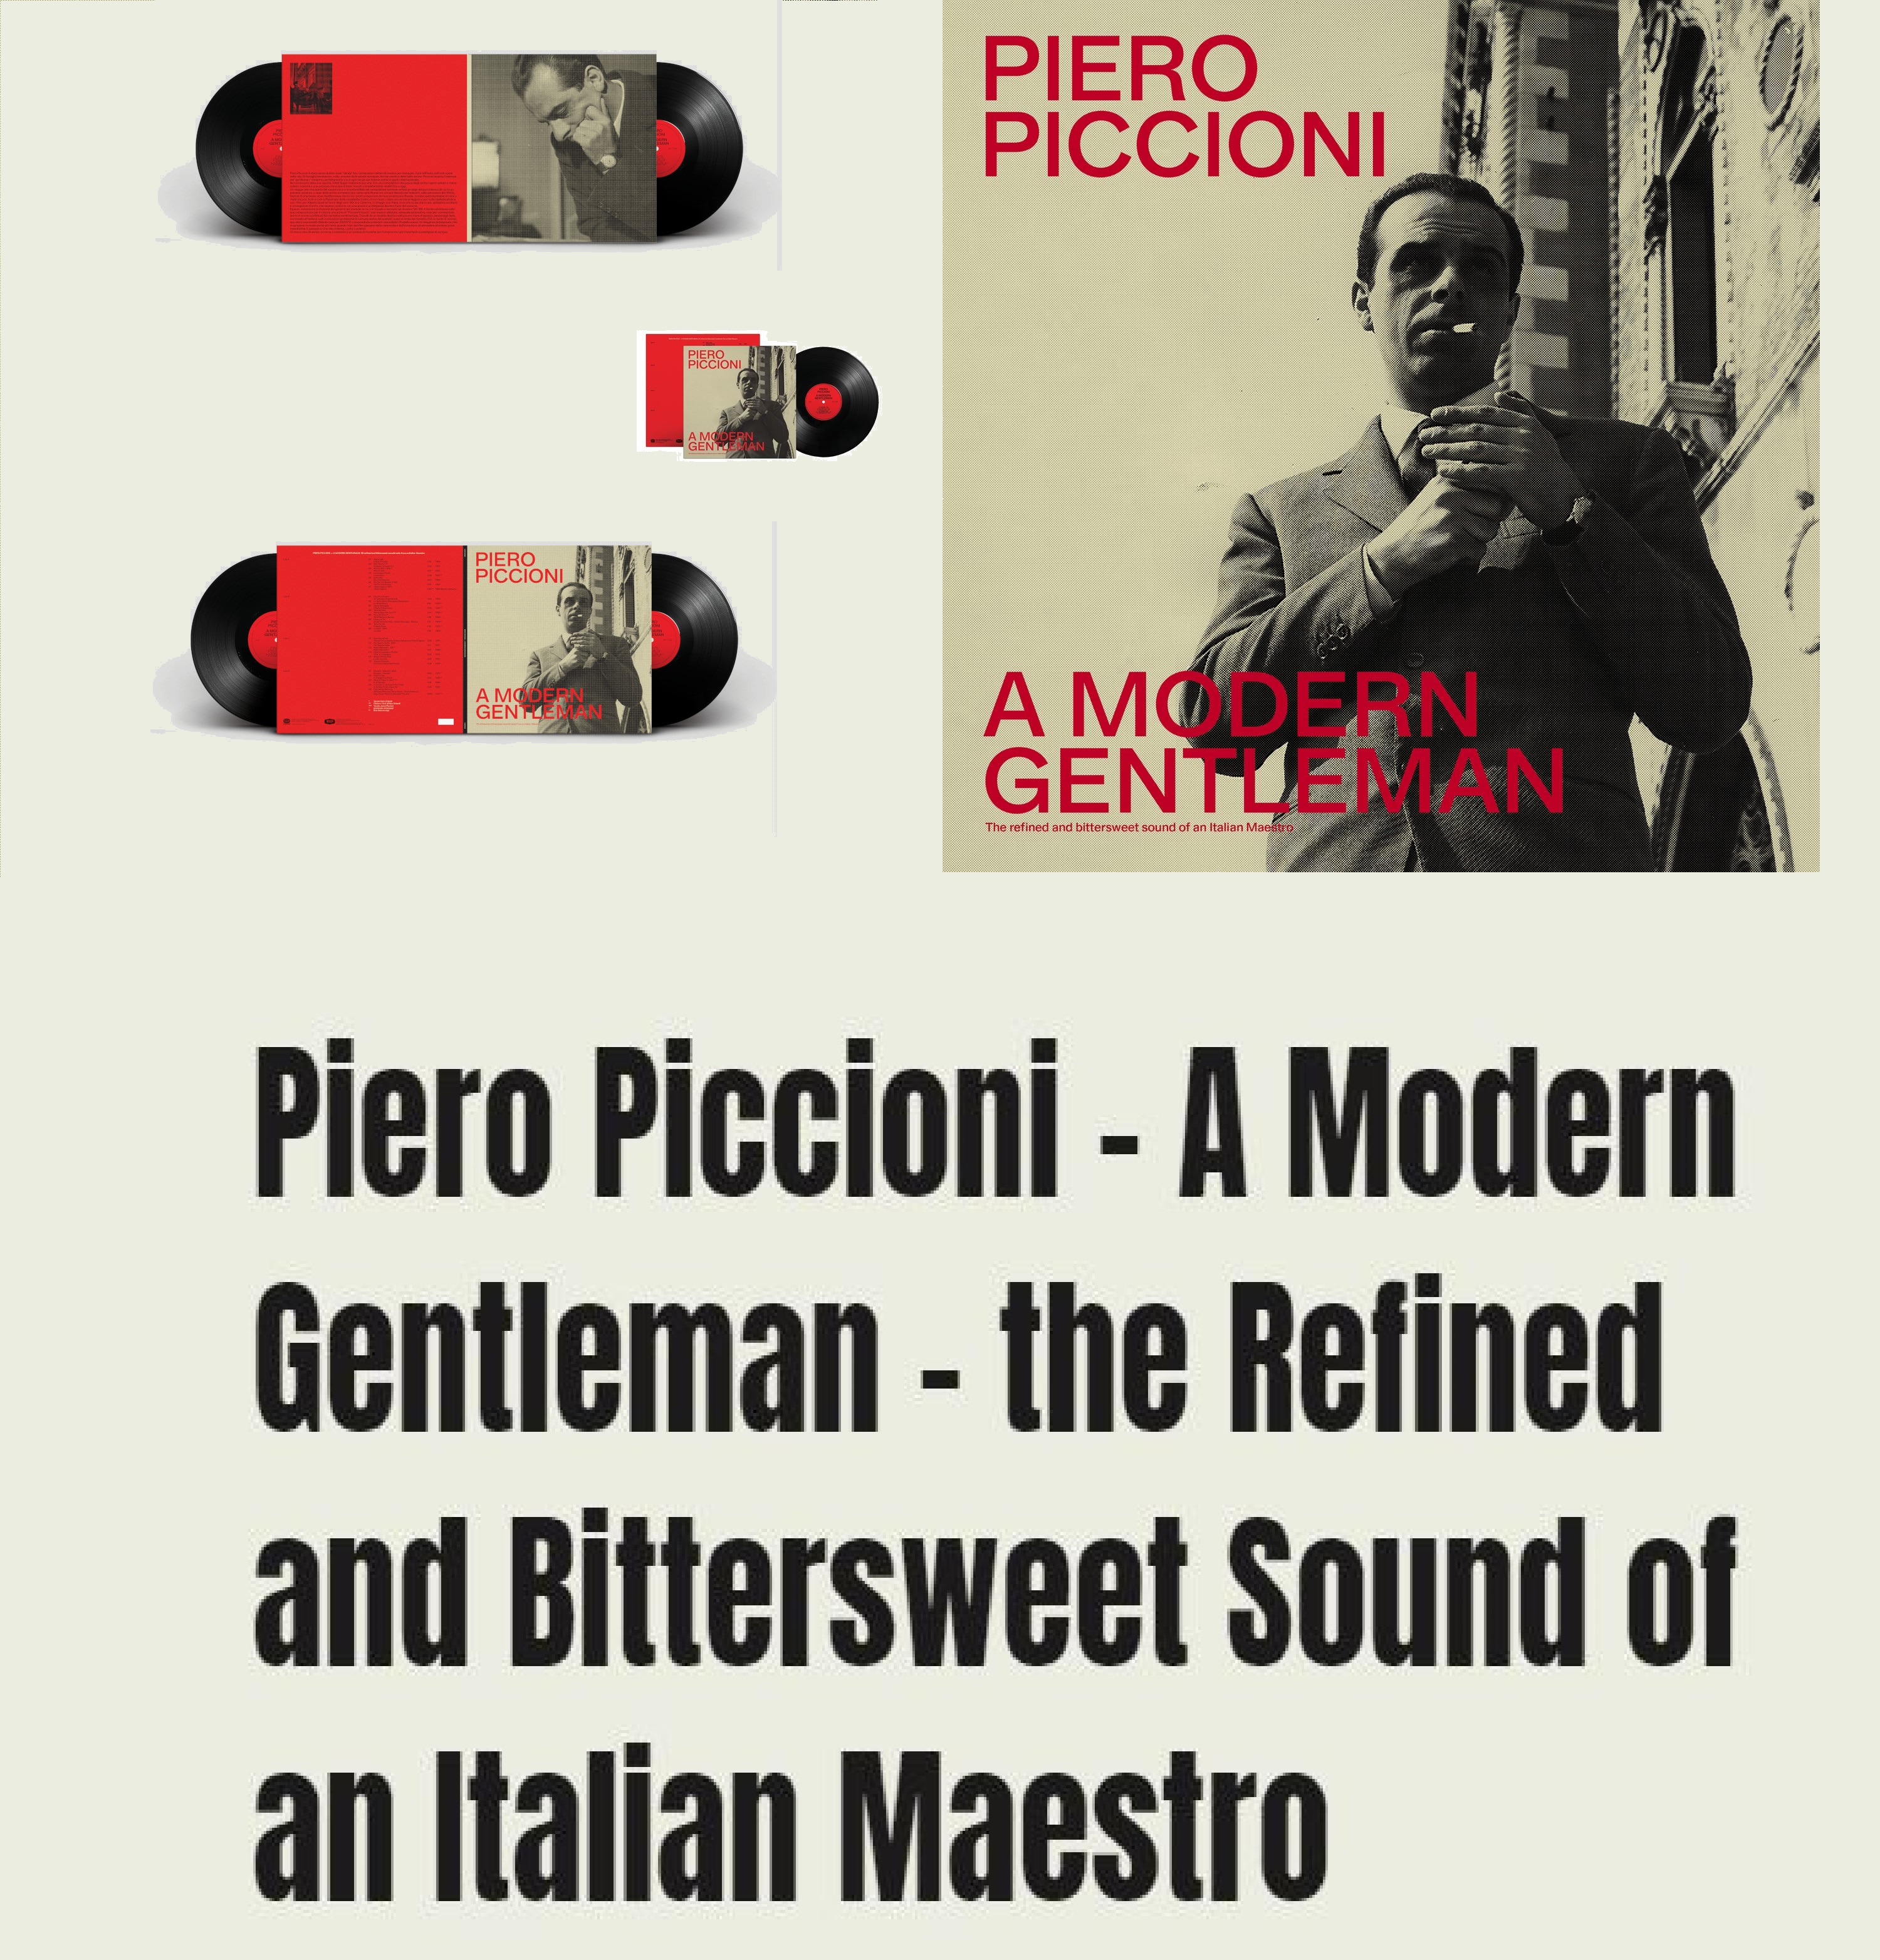 A Modern Gentleman - The Refined and Bittersweet Sound of an Italian Maestro